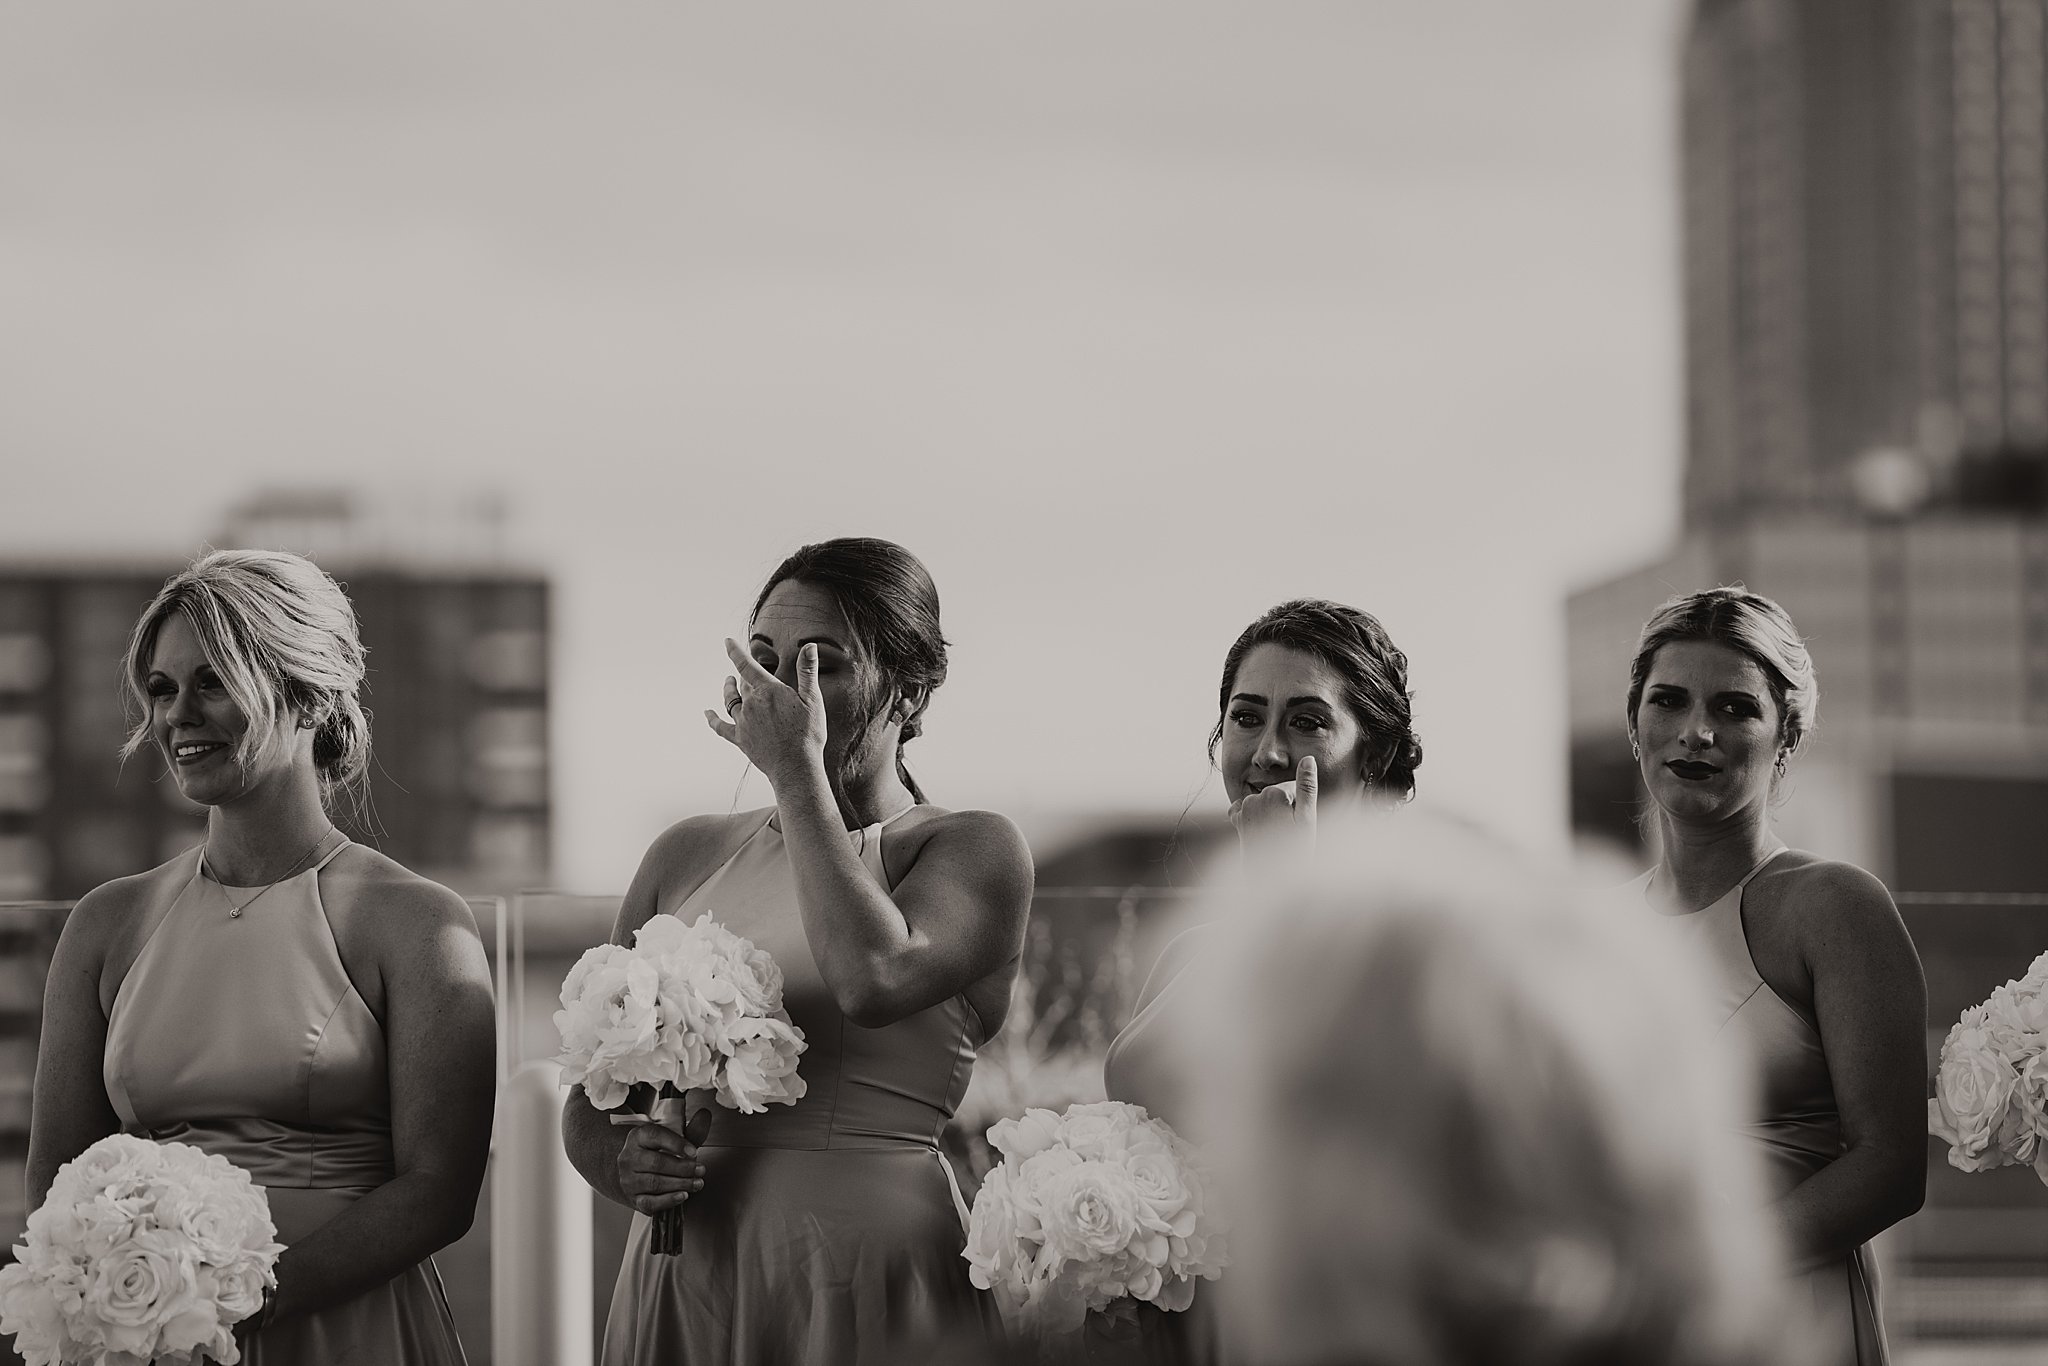 Downtown St. Louis Rooftop Wedding